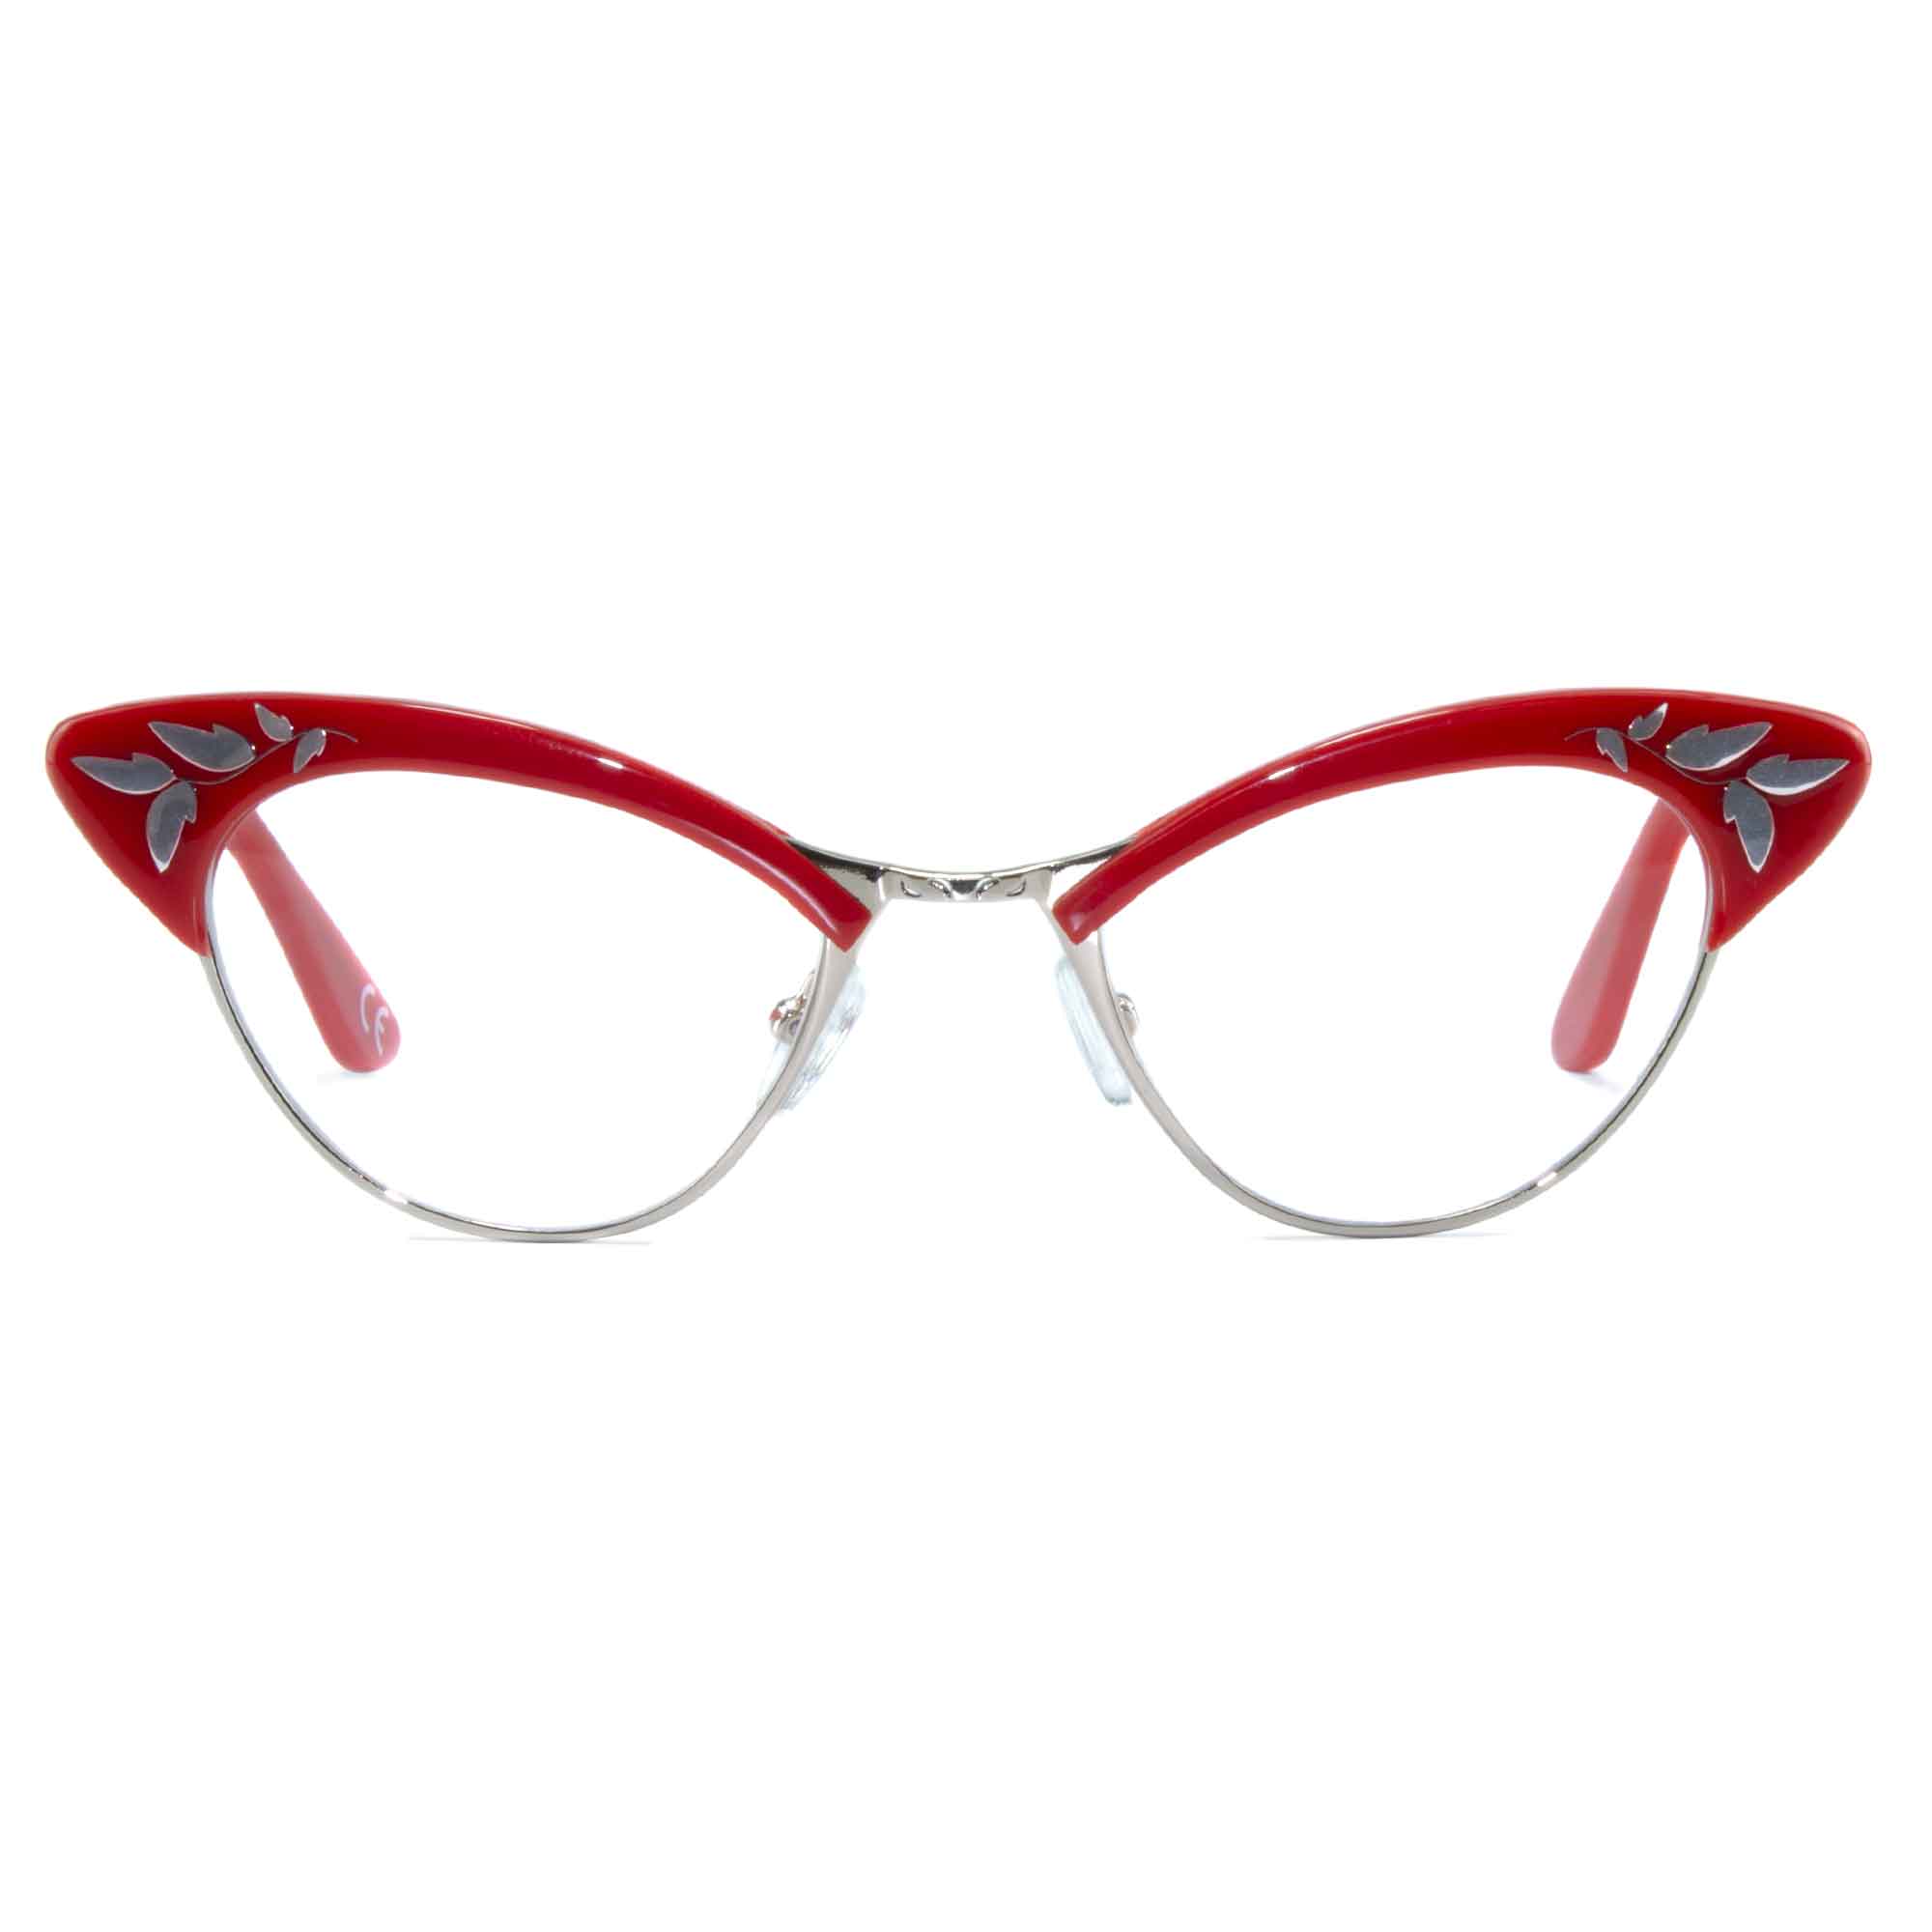 red & gold cat eye glasses front view